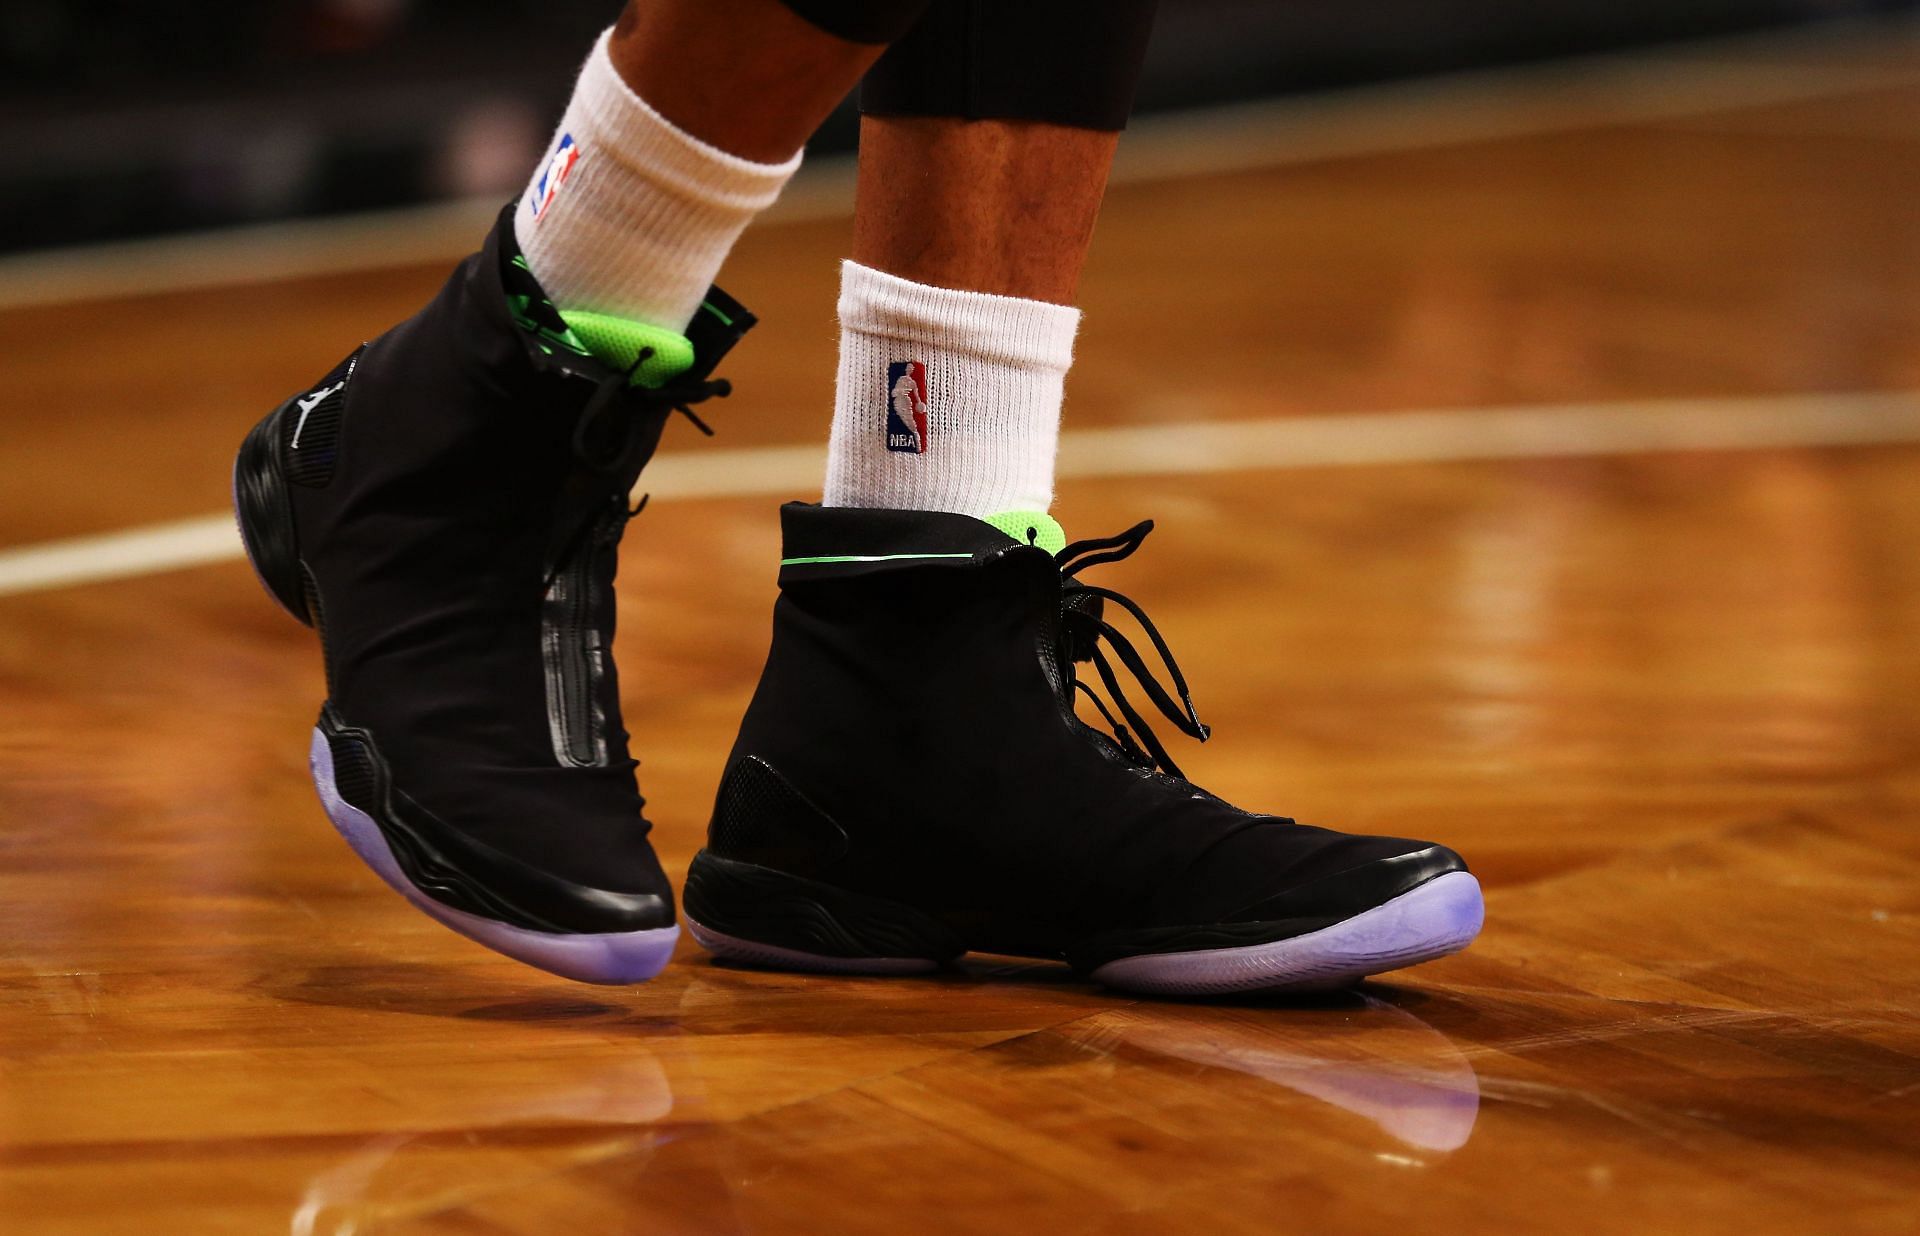 Russell Westbrook of the OKC Thunder wears the new Air Jordan XX8 sneakers during a game against the Brooklyn Nets on Dec. 4 in the Brooklyn borough of New York City.